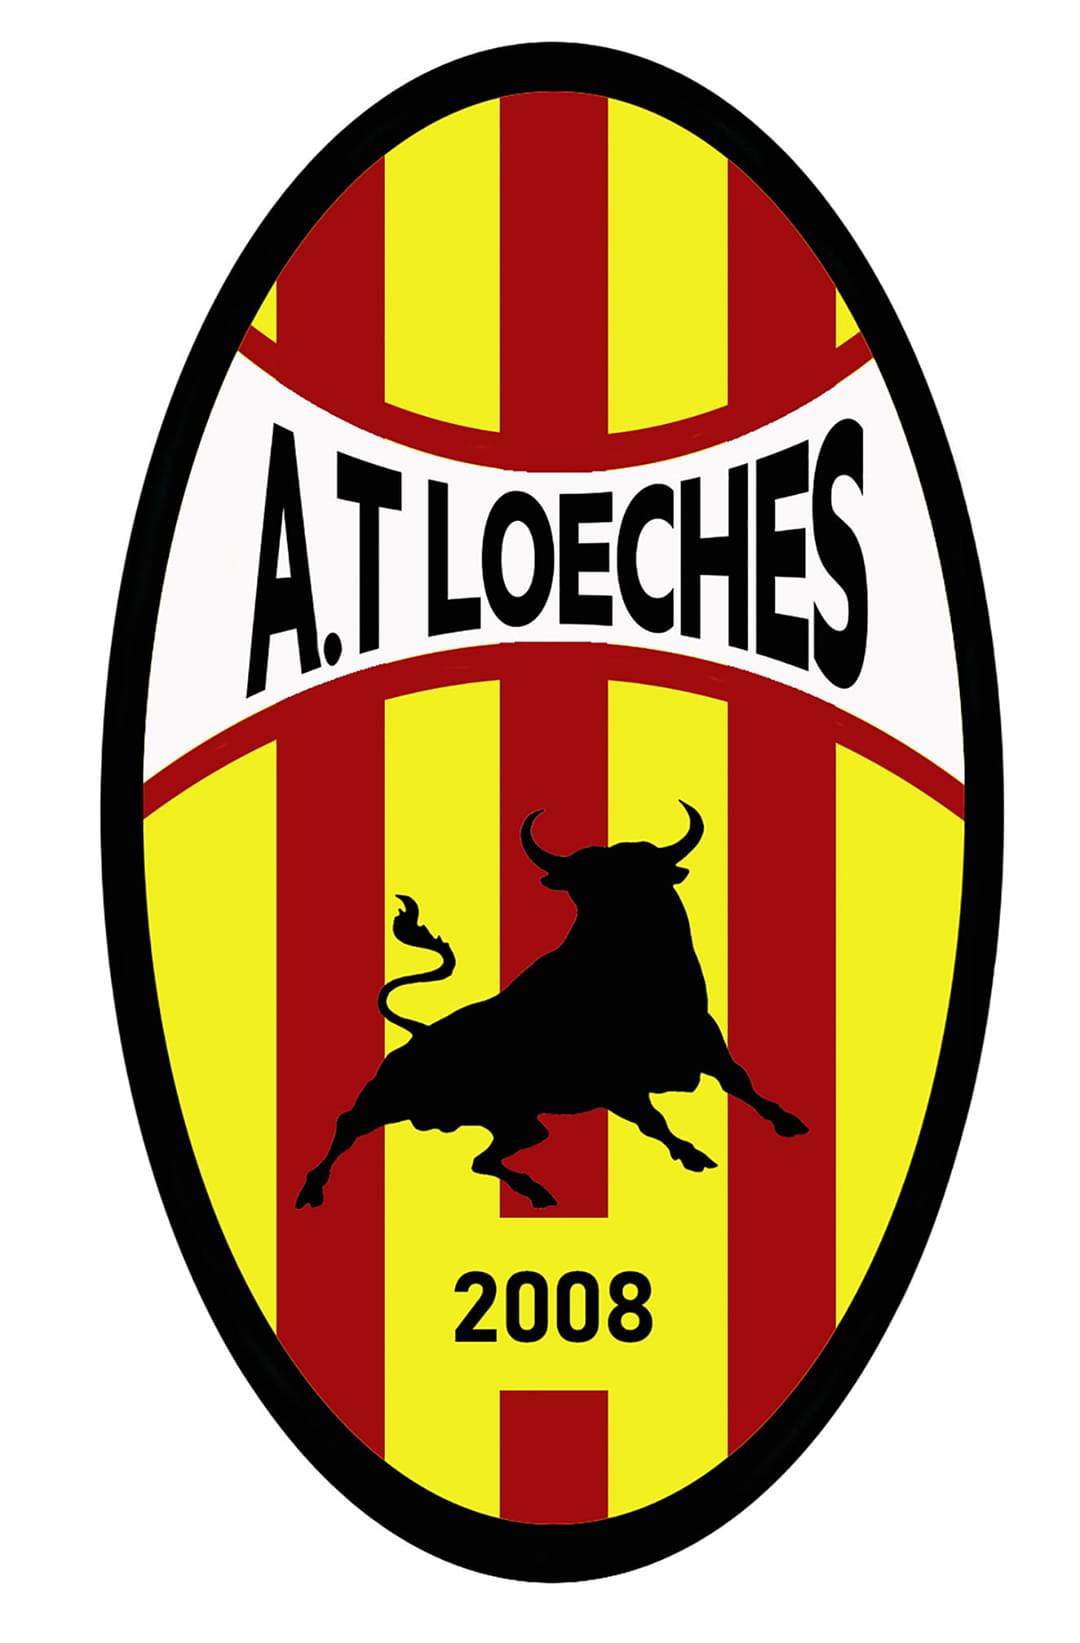 ATLETICO LOECHES 'A'